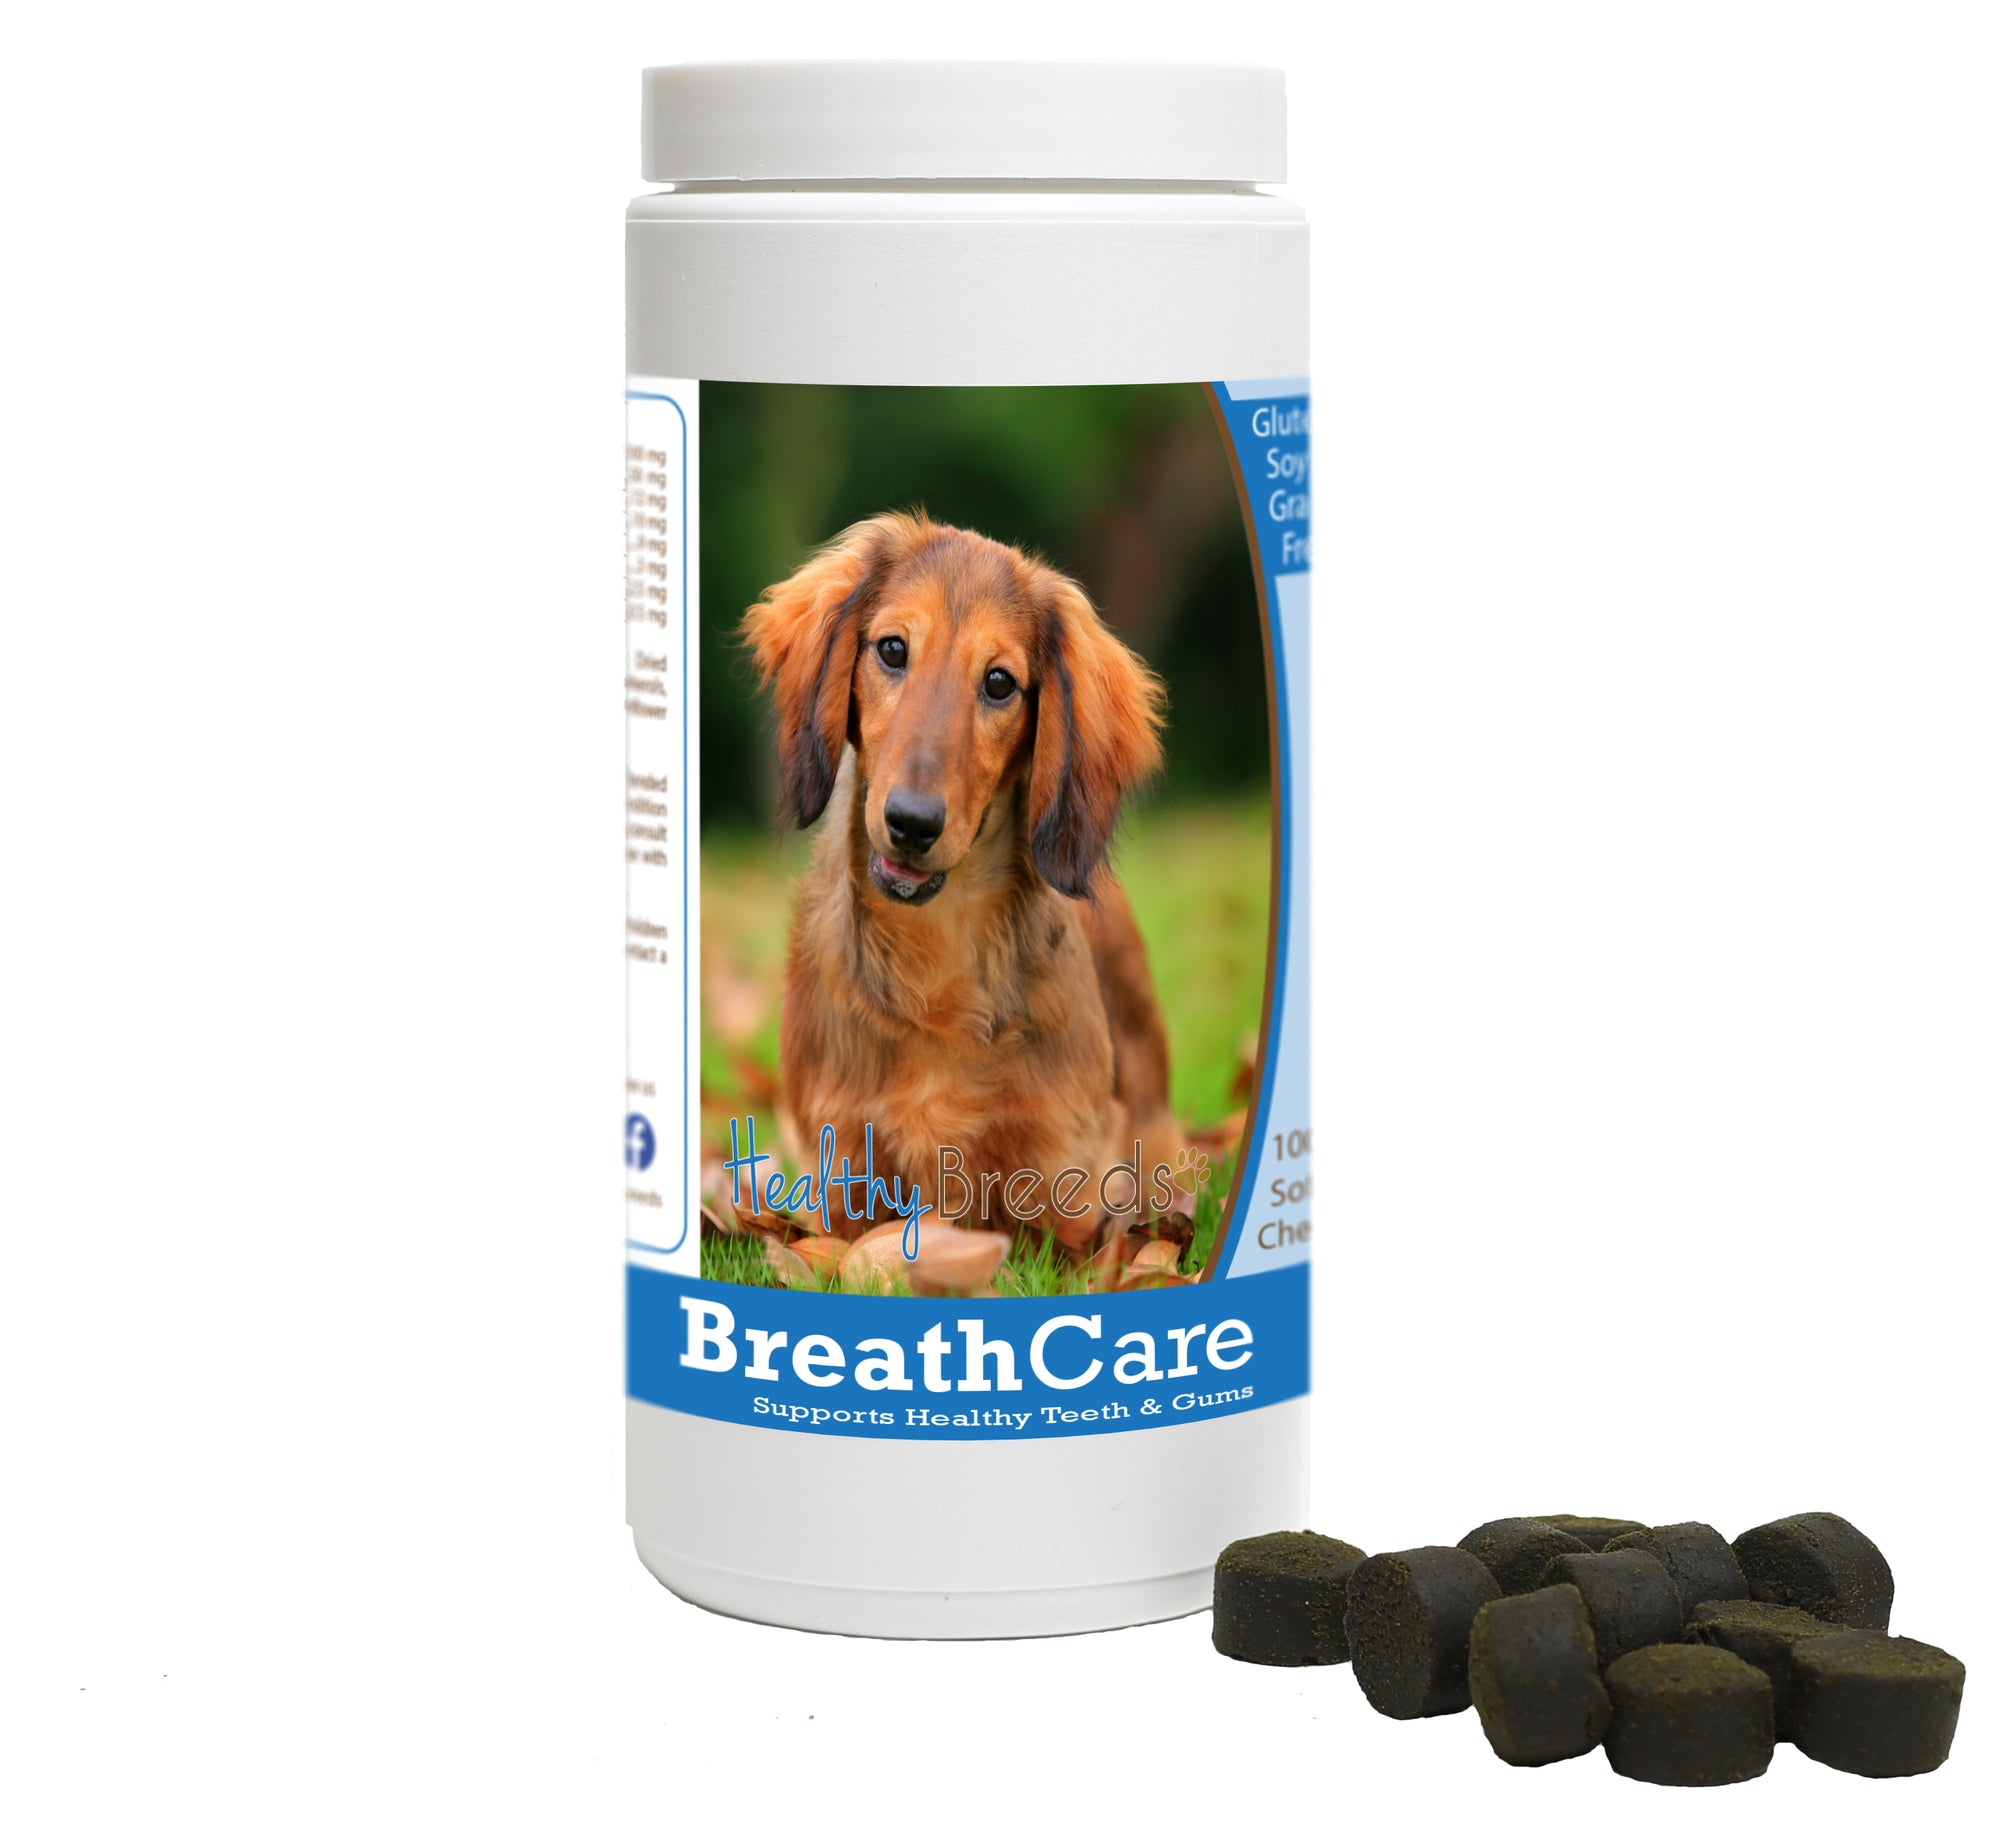 Healthy Breeds Dachshund Breath Care Soft Chews for Dogs 60 Count